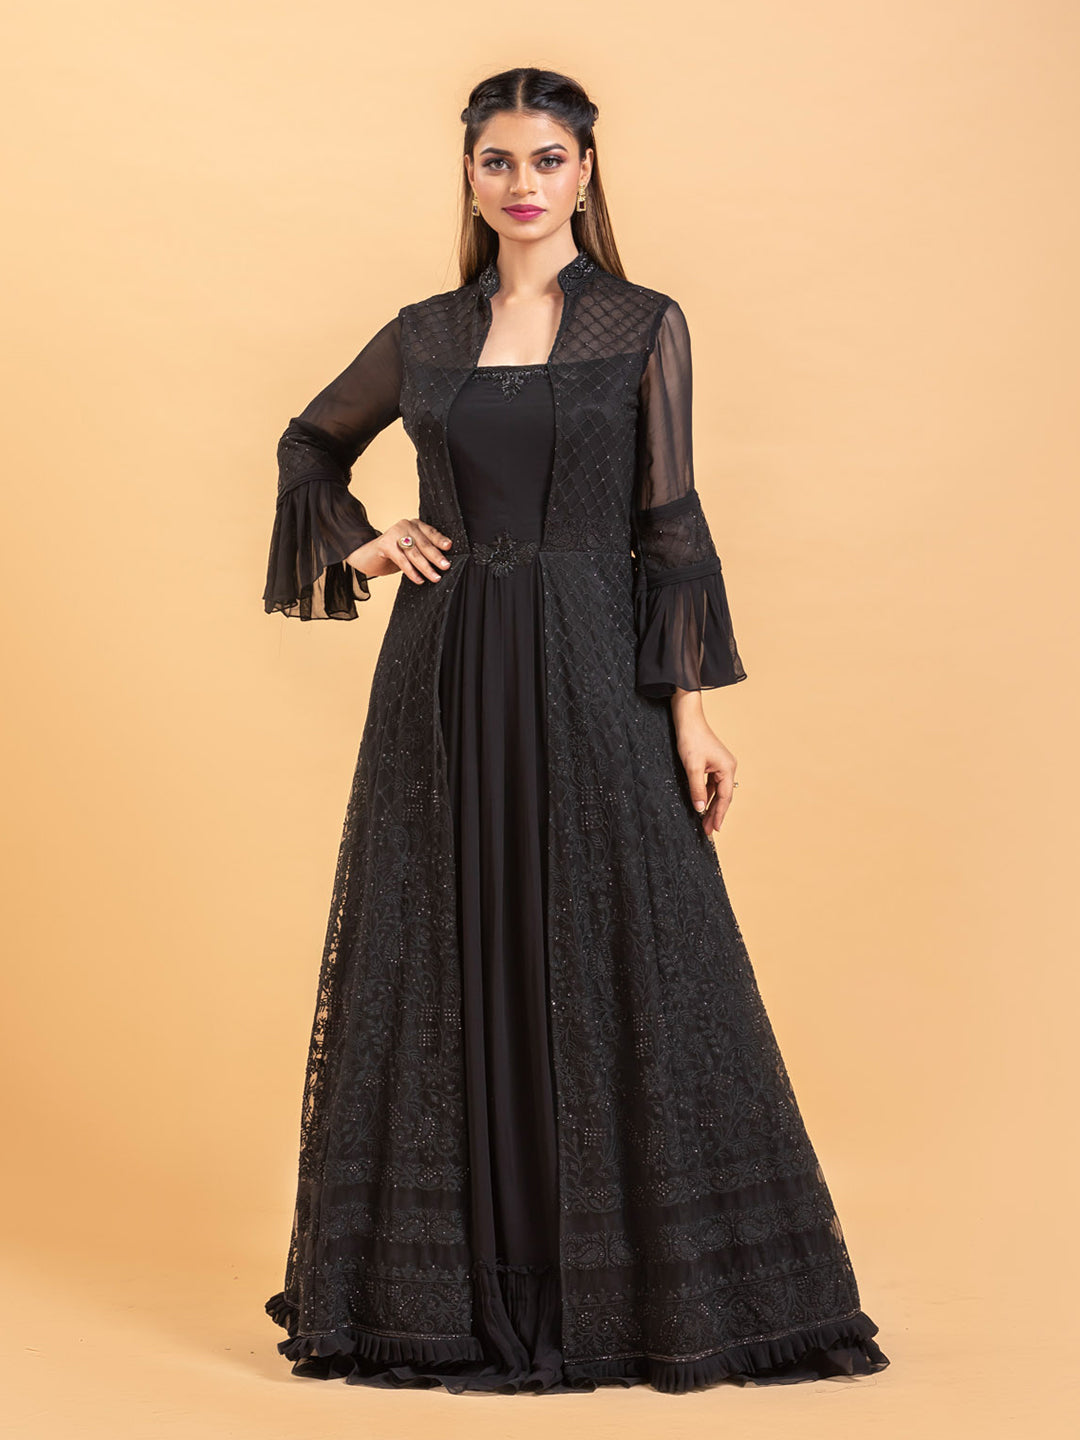 Women Gowns - Buy Women Gowns Online Starting at Just ₹260 | Meesho